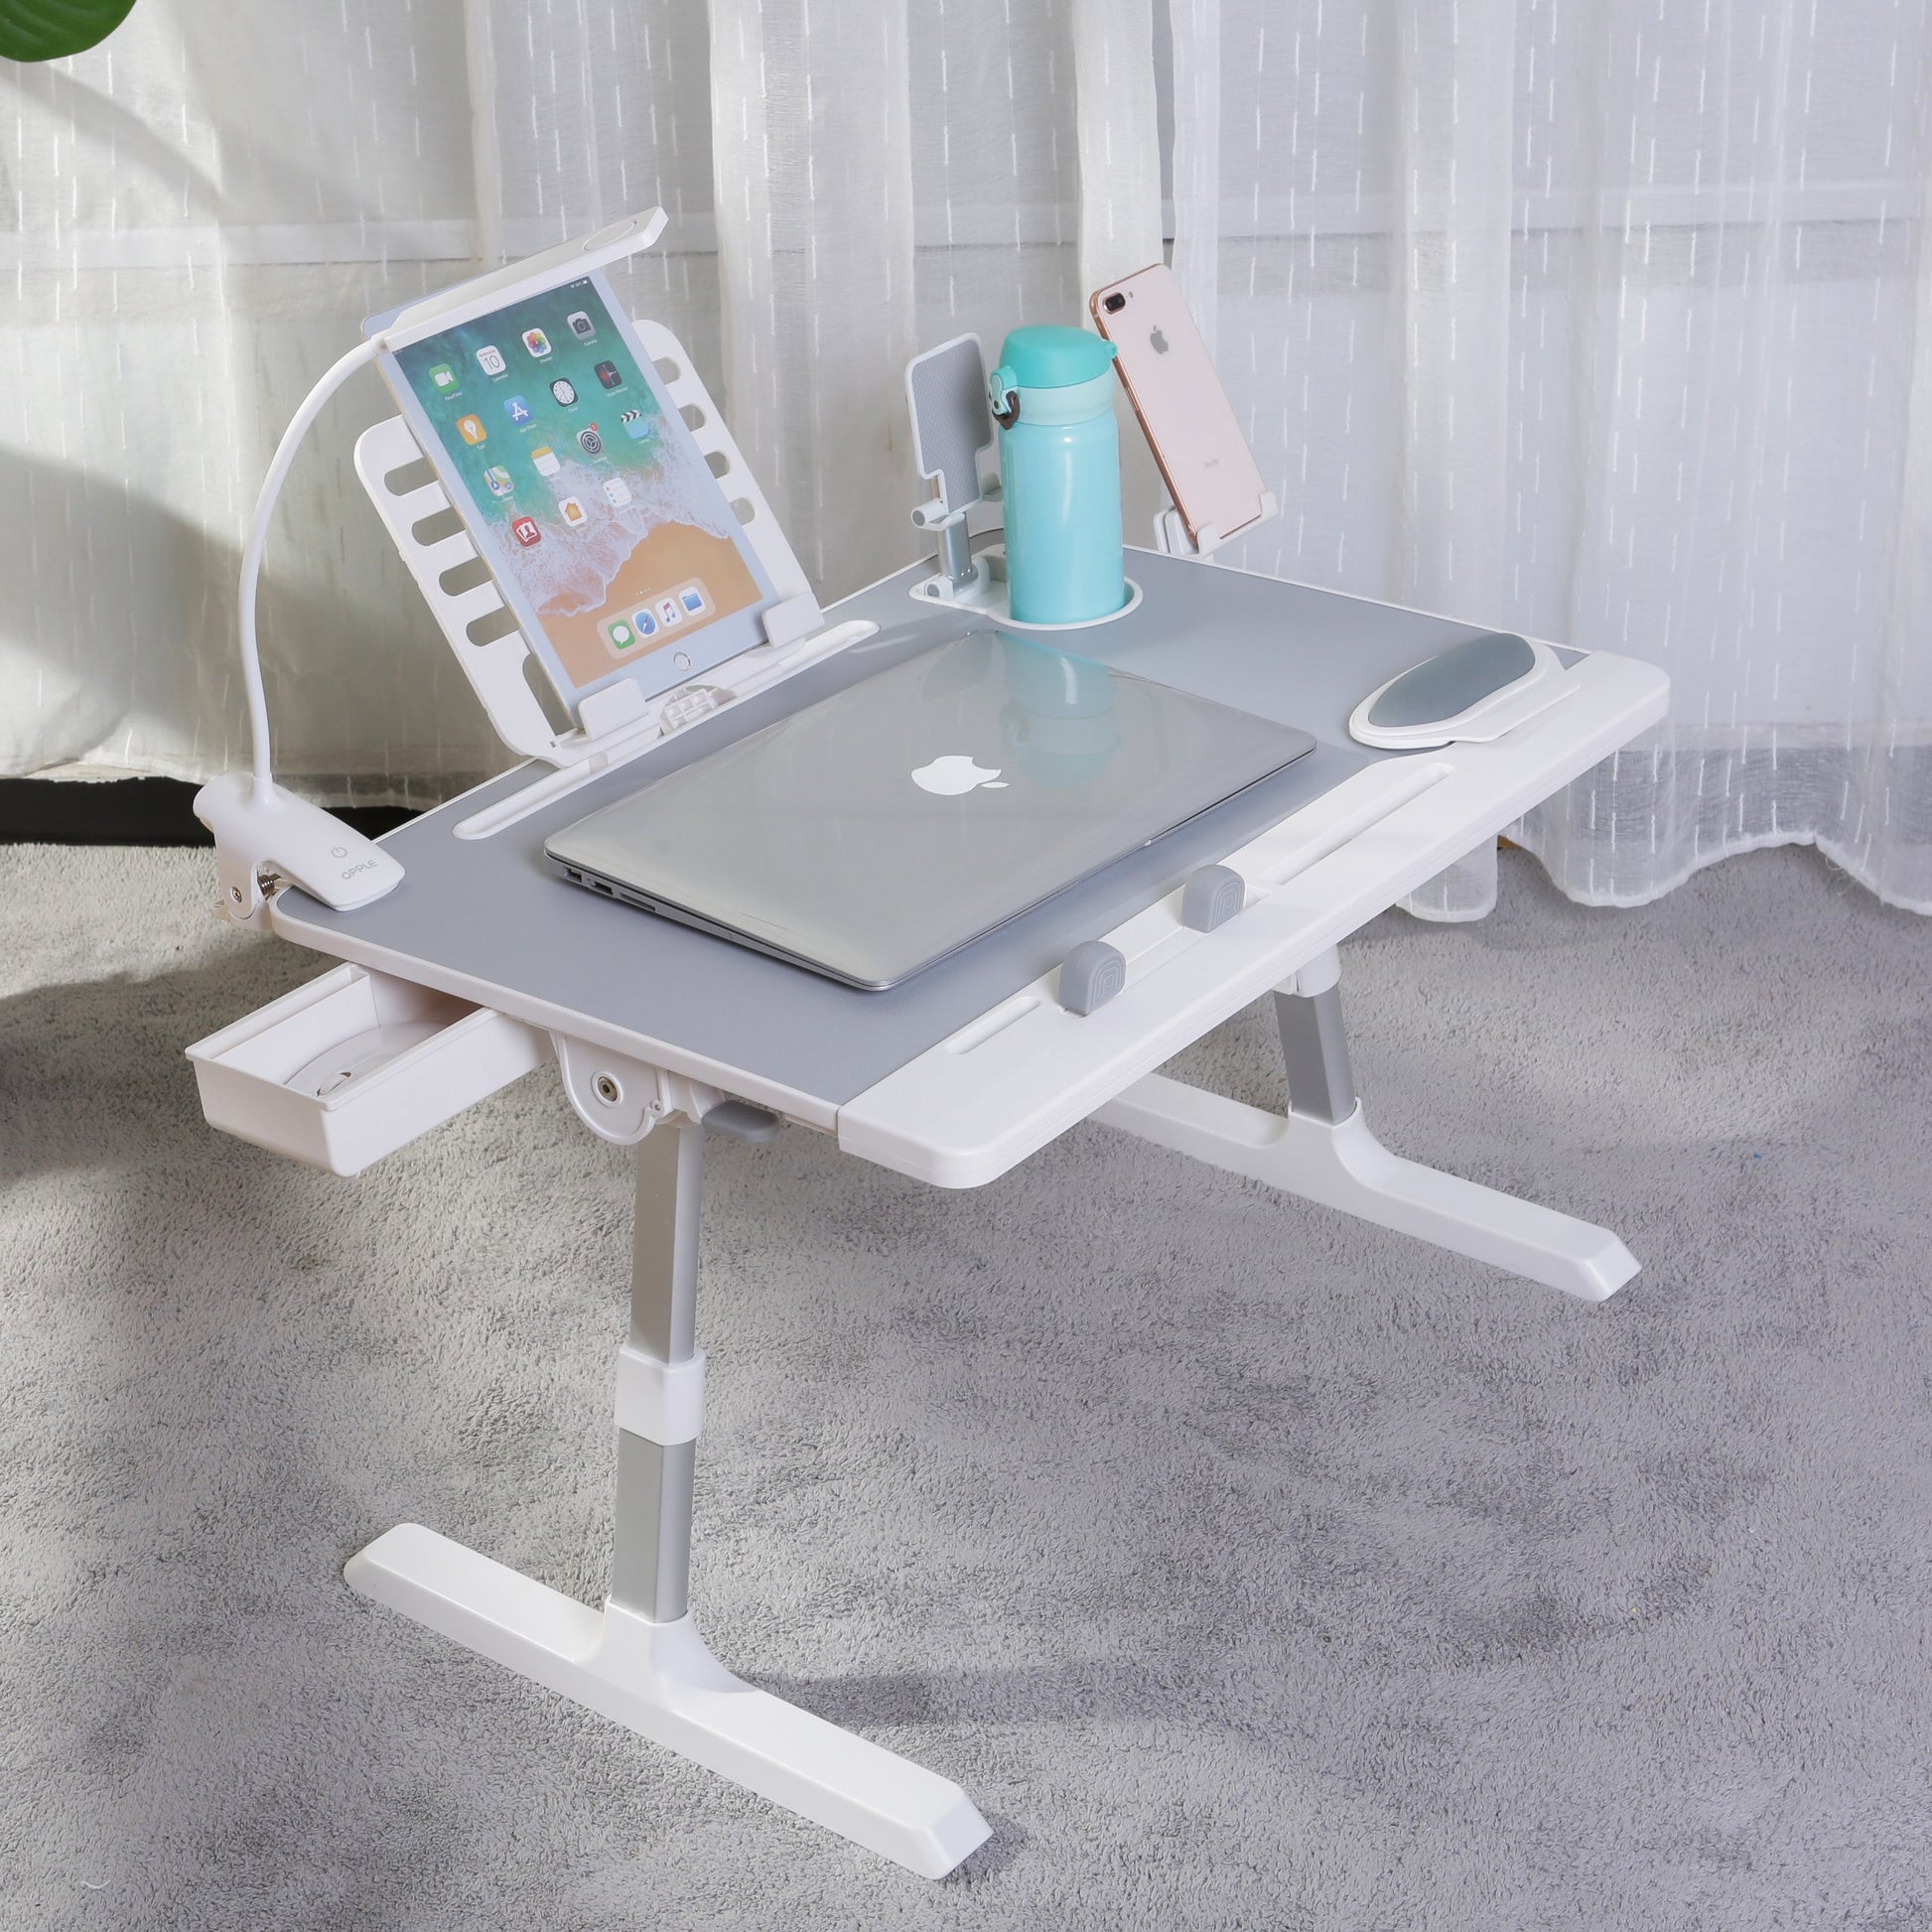 Portable Laptop Table Stand with Storage Drawer, Foldable Laptop Tray for Sofa Couch Floor, Adjustable Folding Laptop Desk baby magazin 